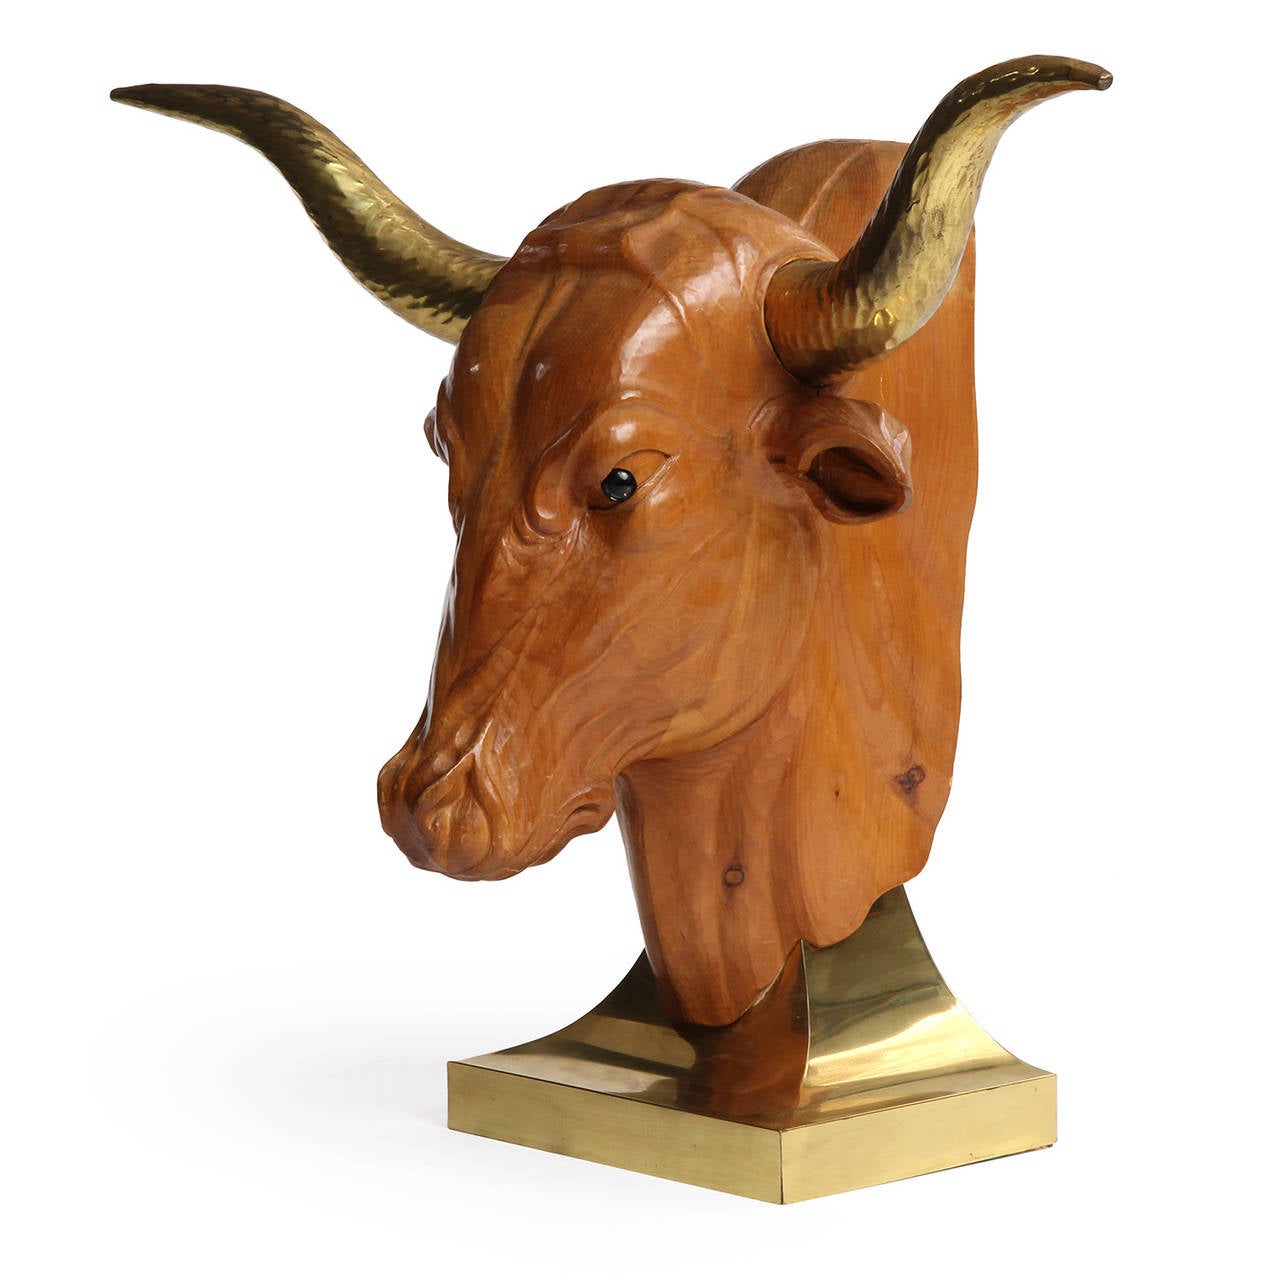 A carved, detailed, life sized wood sculpture of a bull's head with inset brass horns, mounted on a sloping lacquered brass base. Made in USA, circa 1960s.